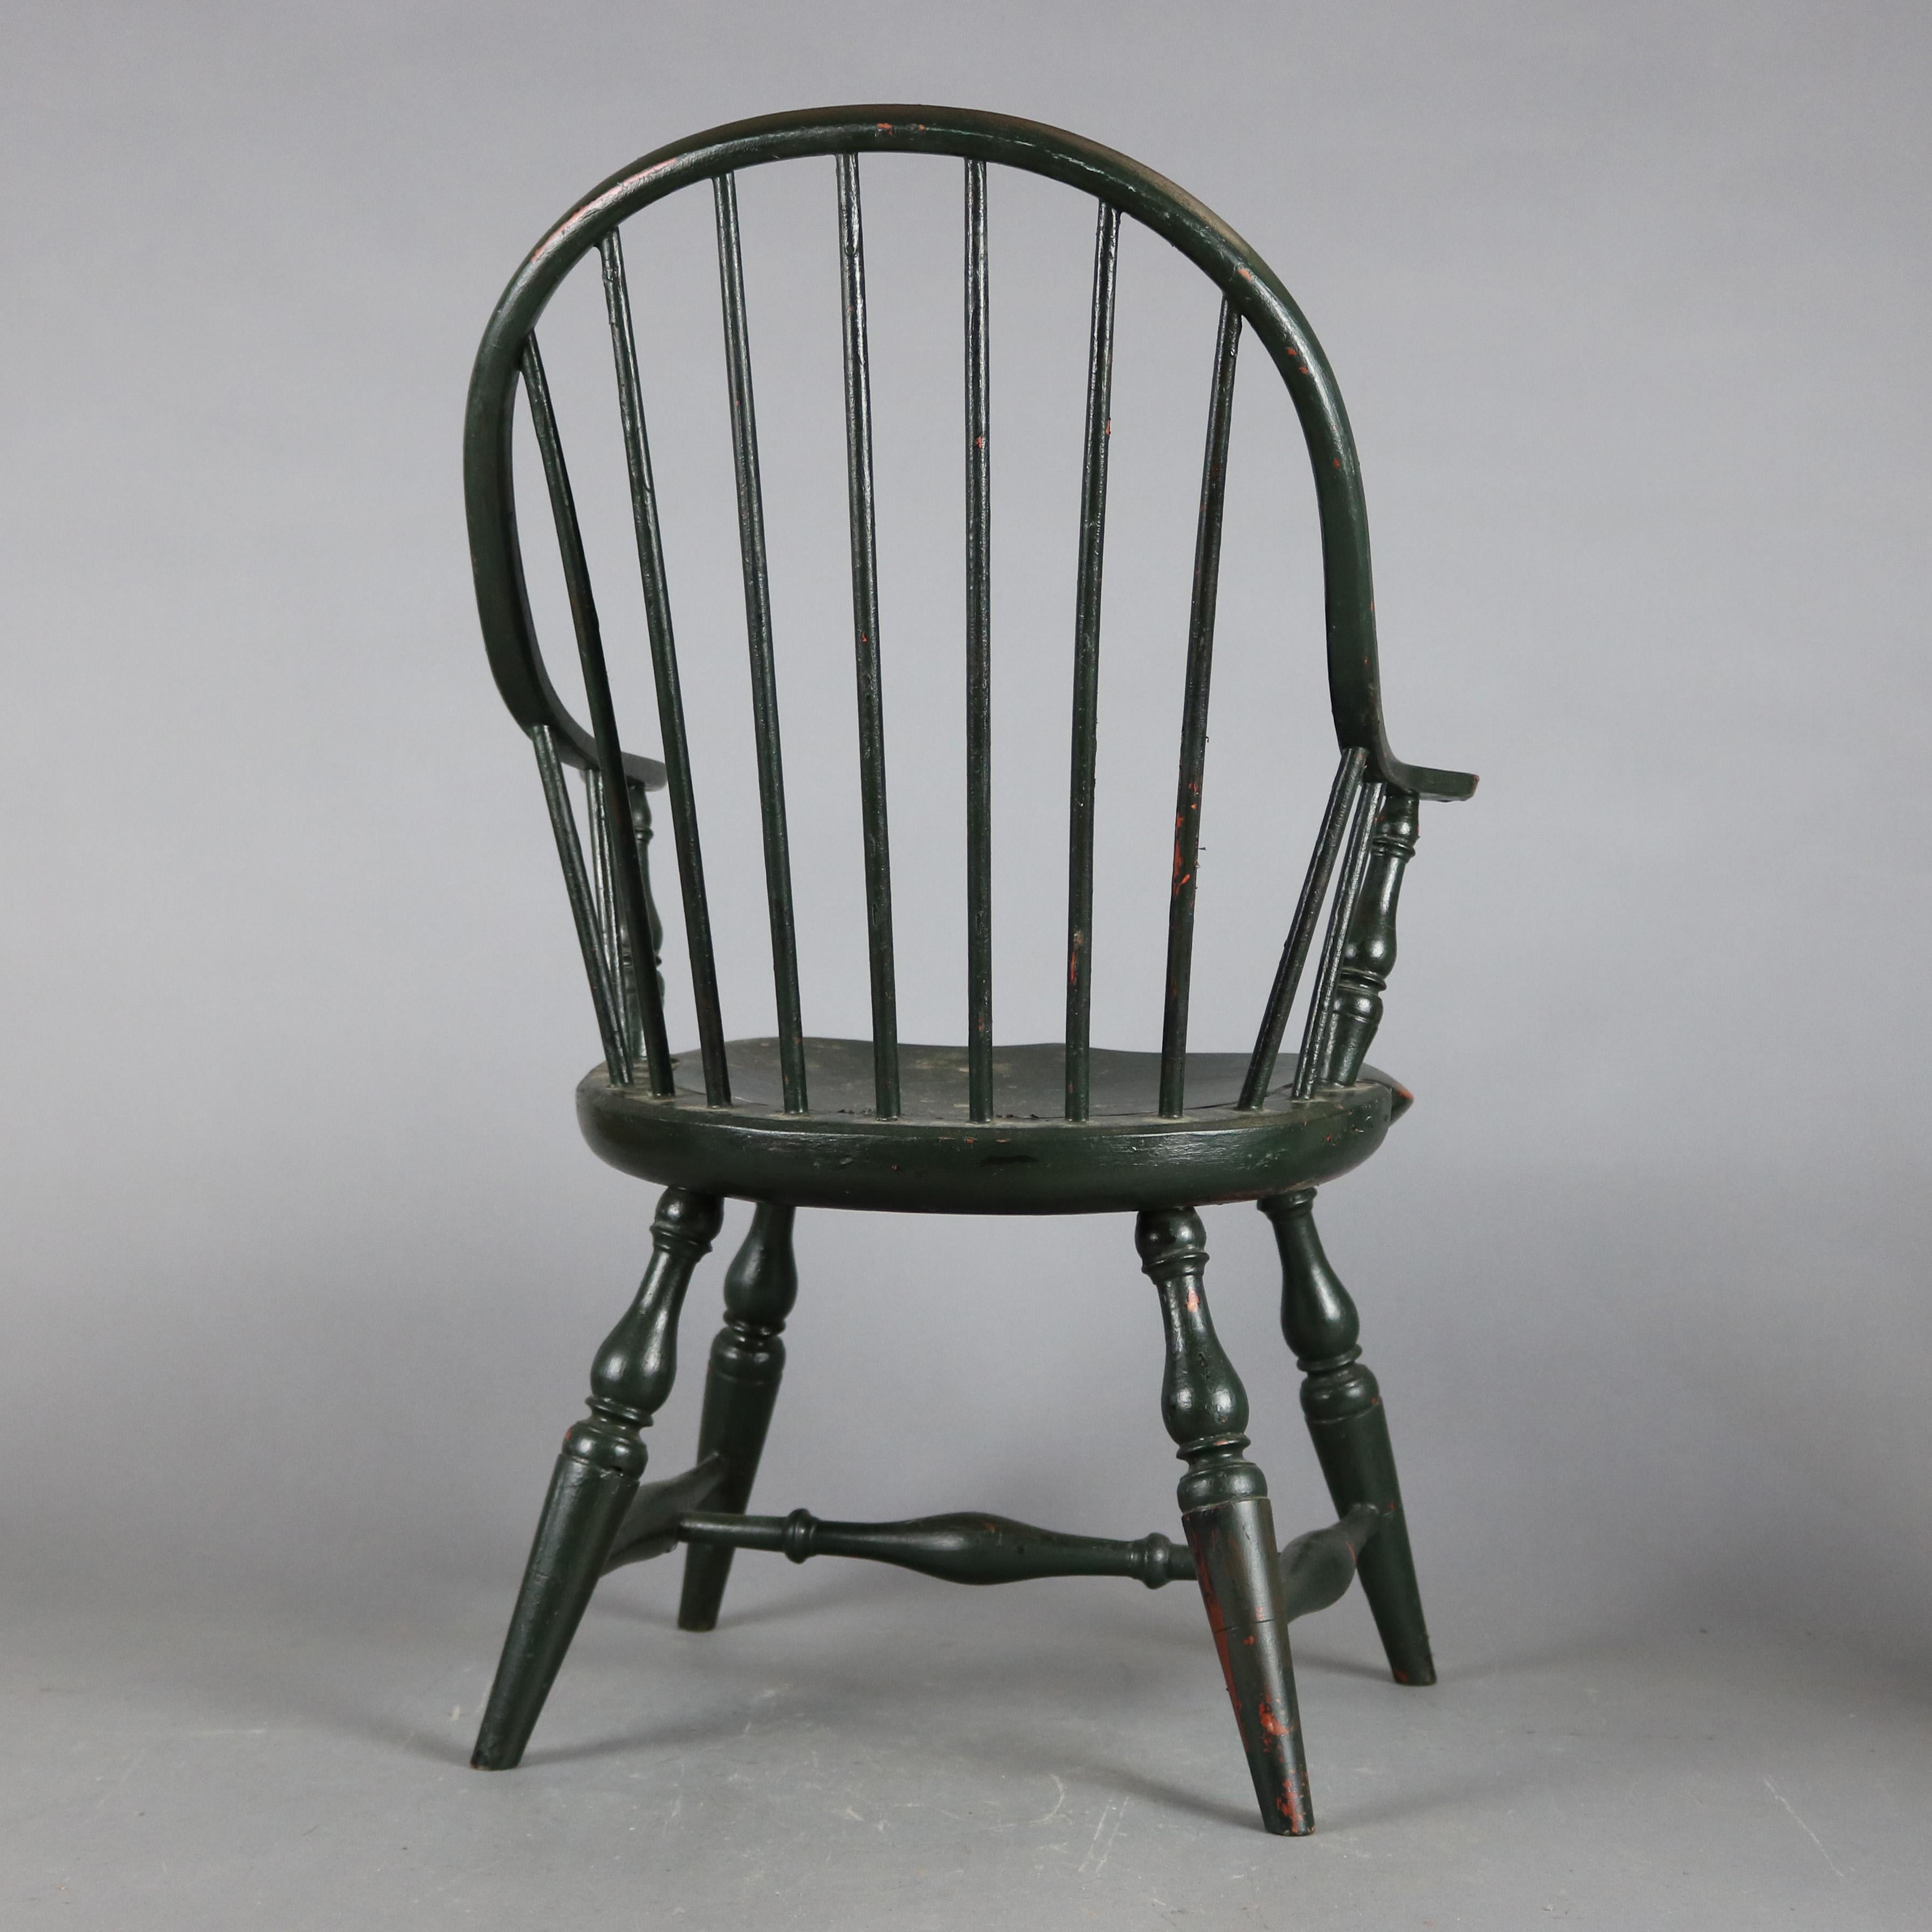 British Colonial Antique Grain Painted Continuous Arm Bow Back Windsor Childs Chair, 20th Century